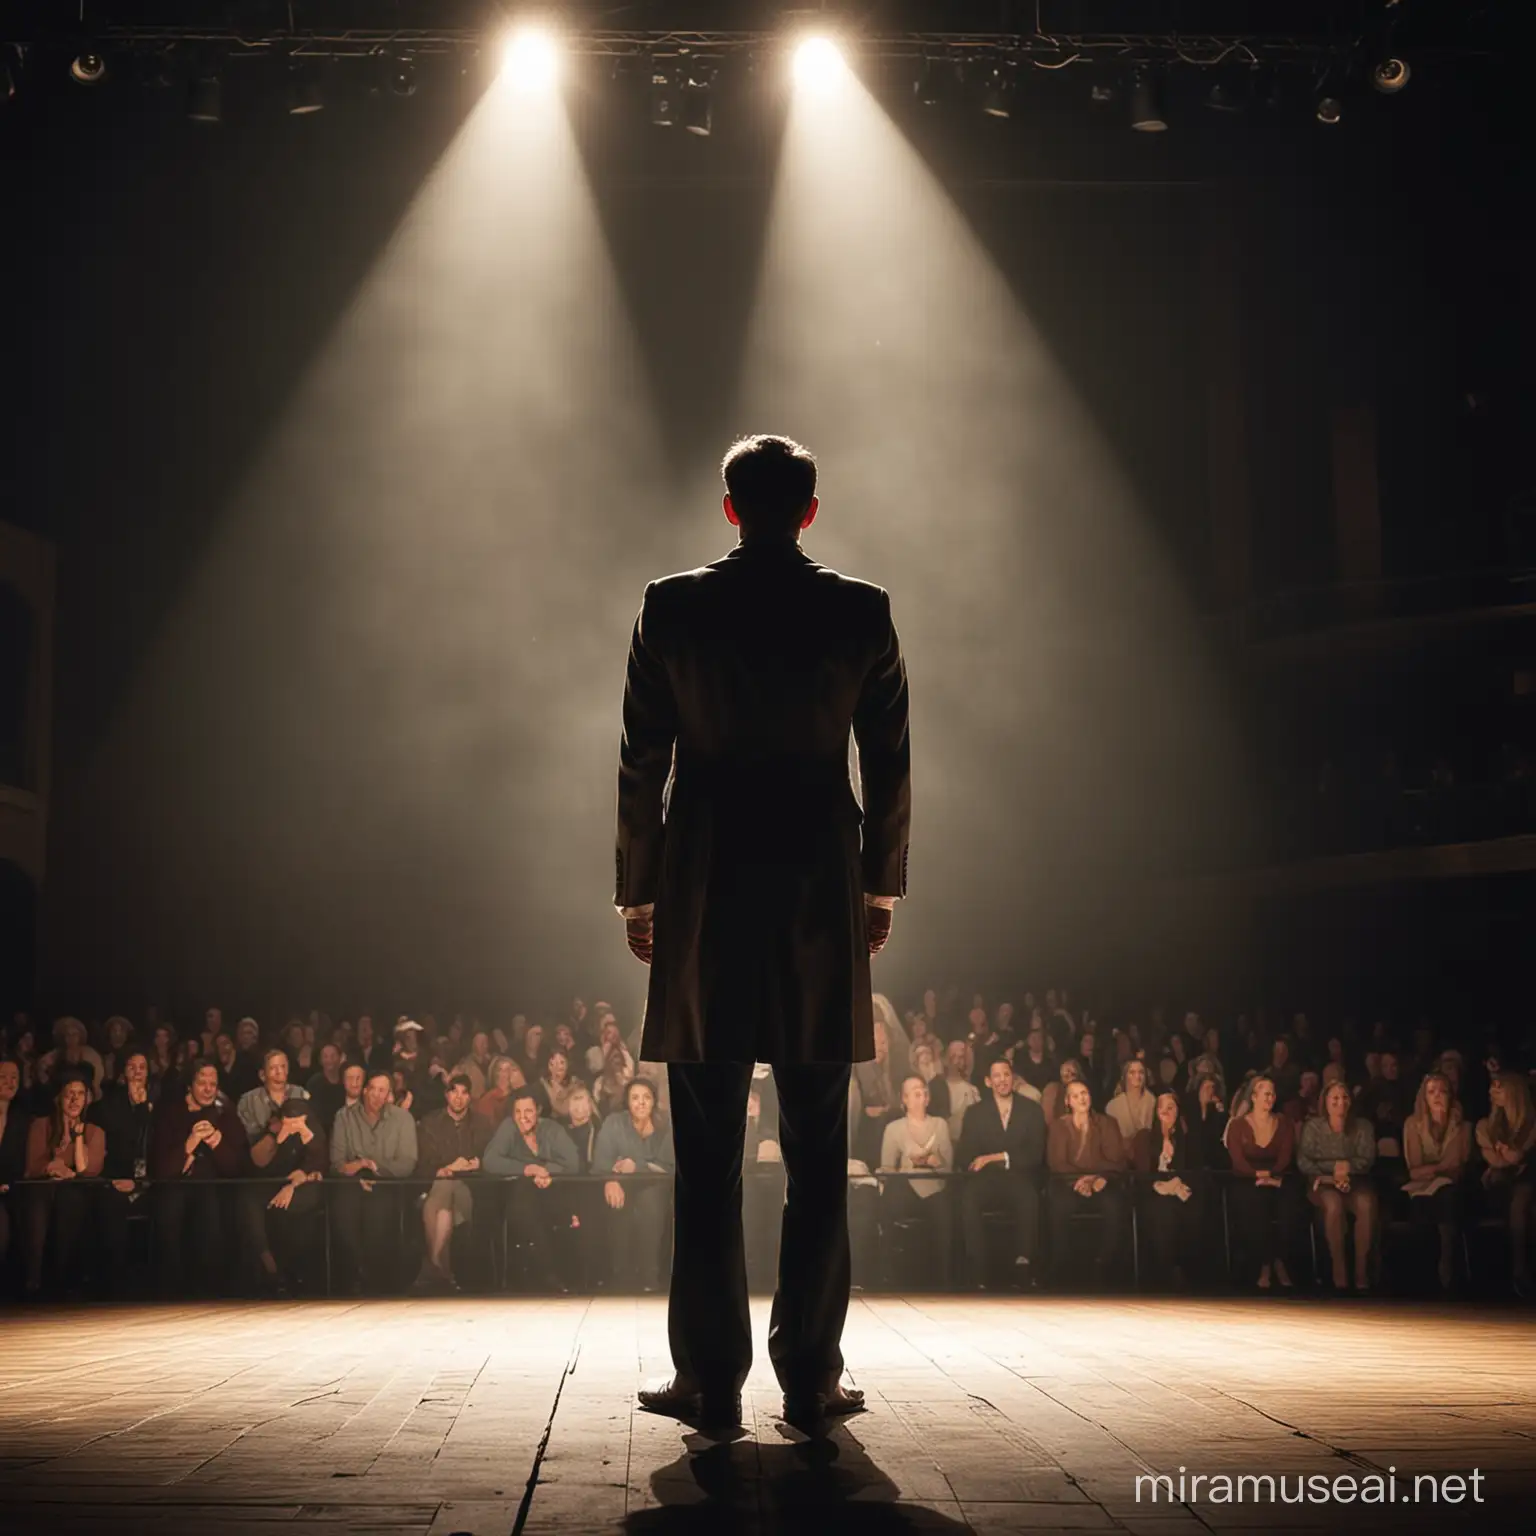 theatre actor standing on stage, spotlight on him, from the back looking out at the crowd